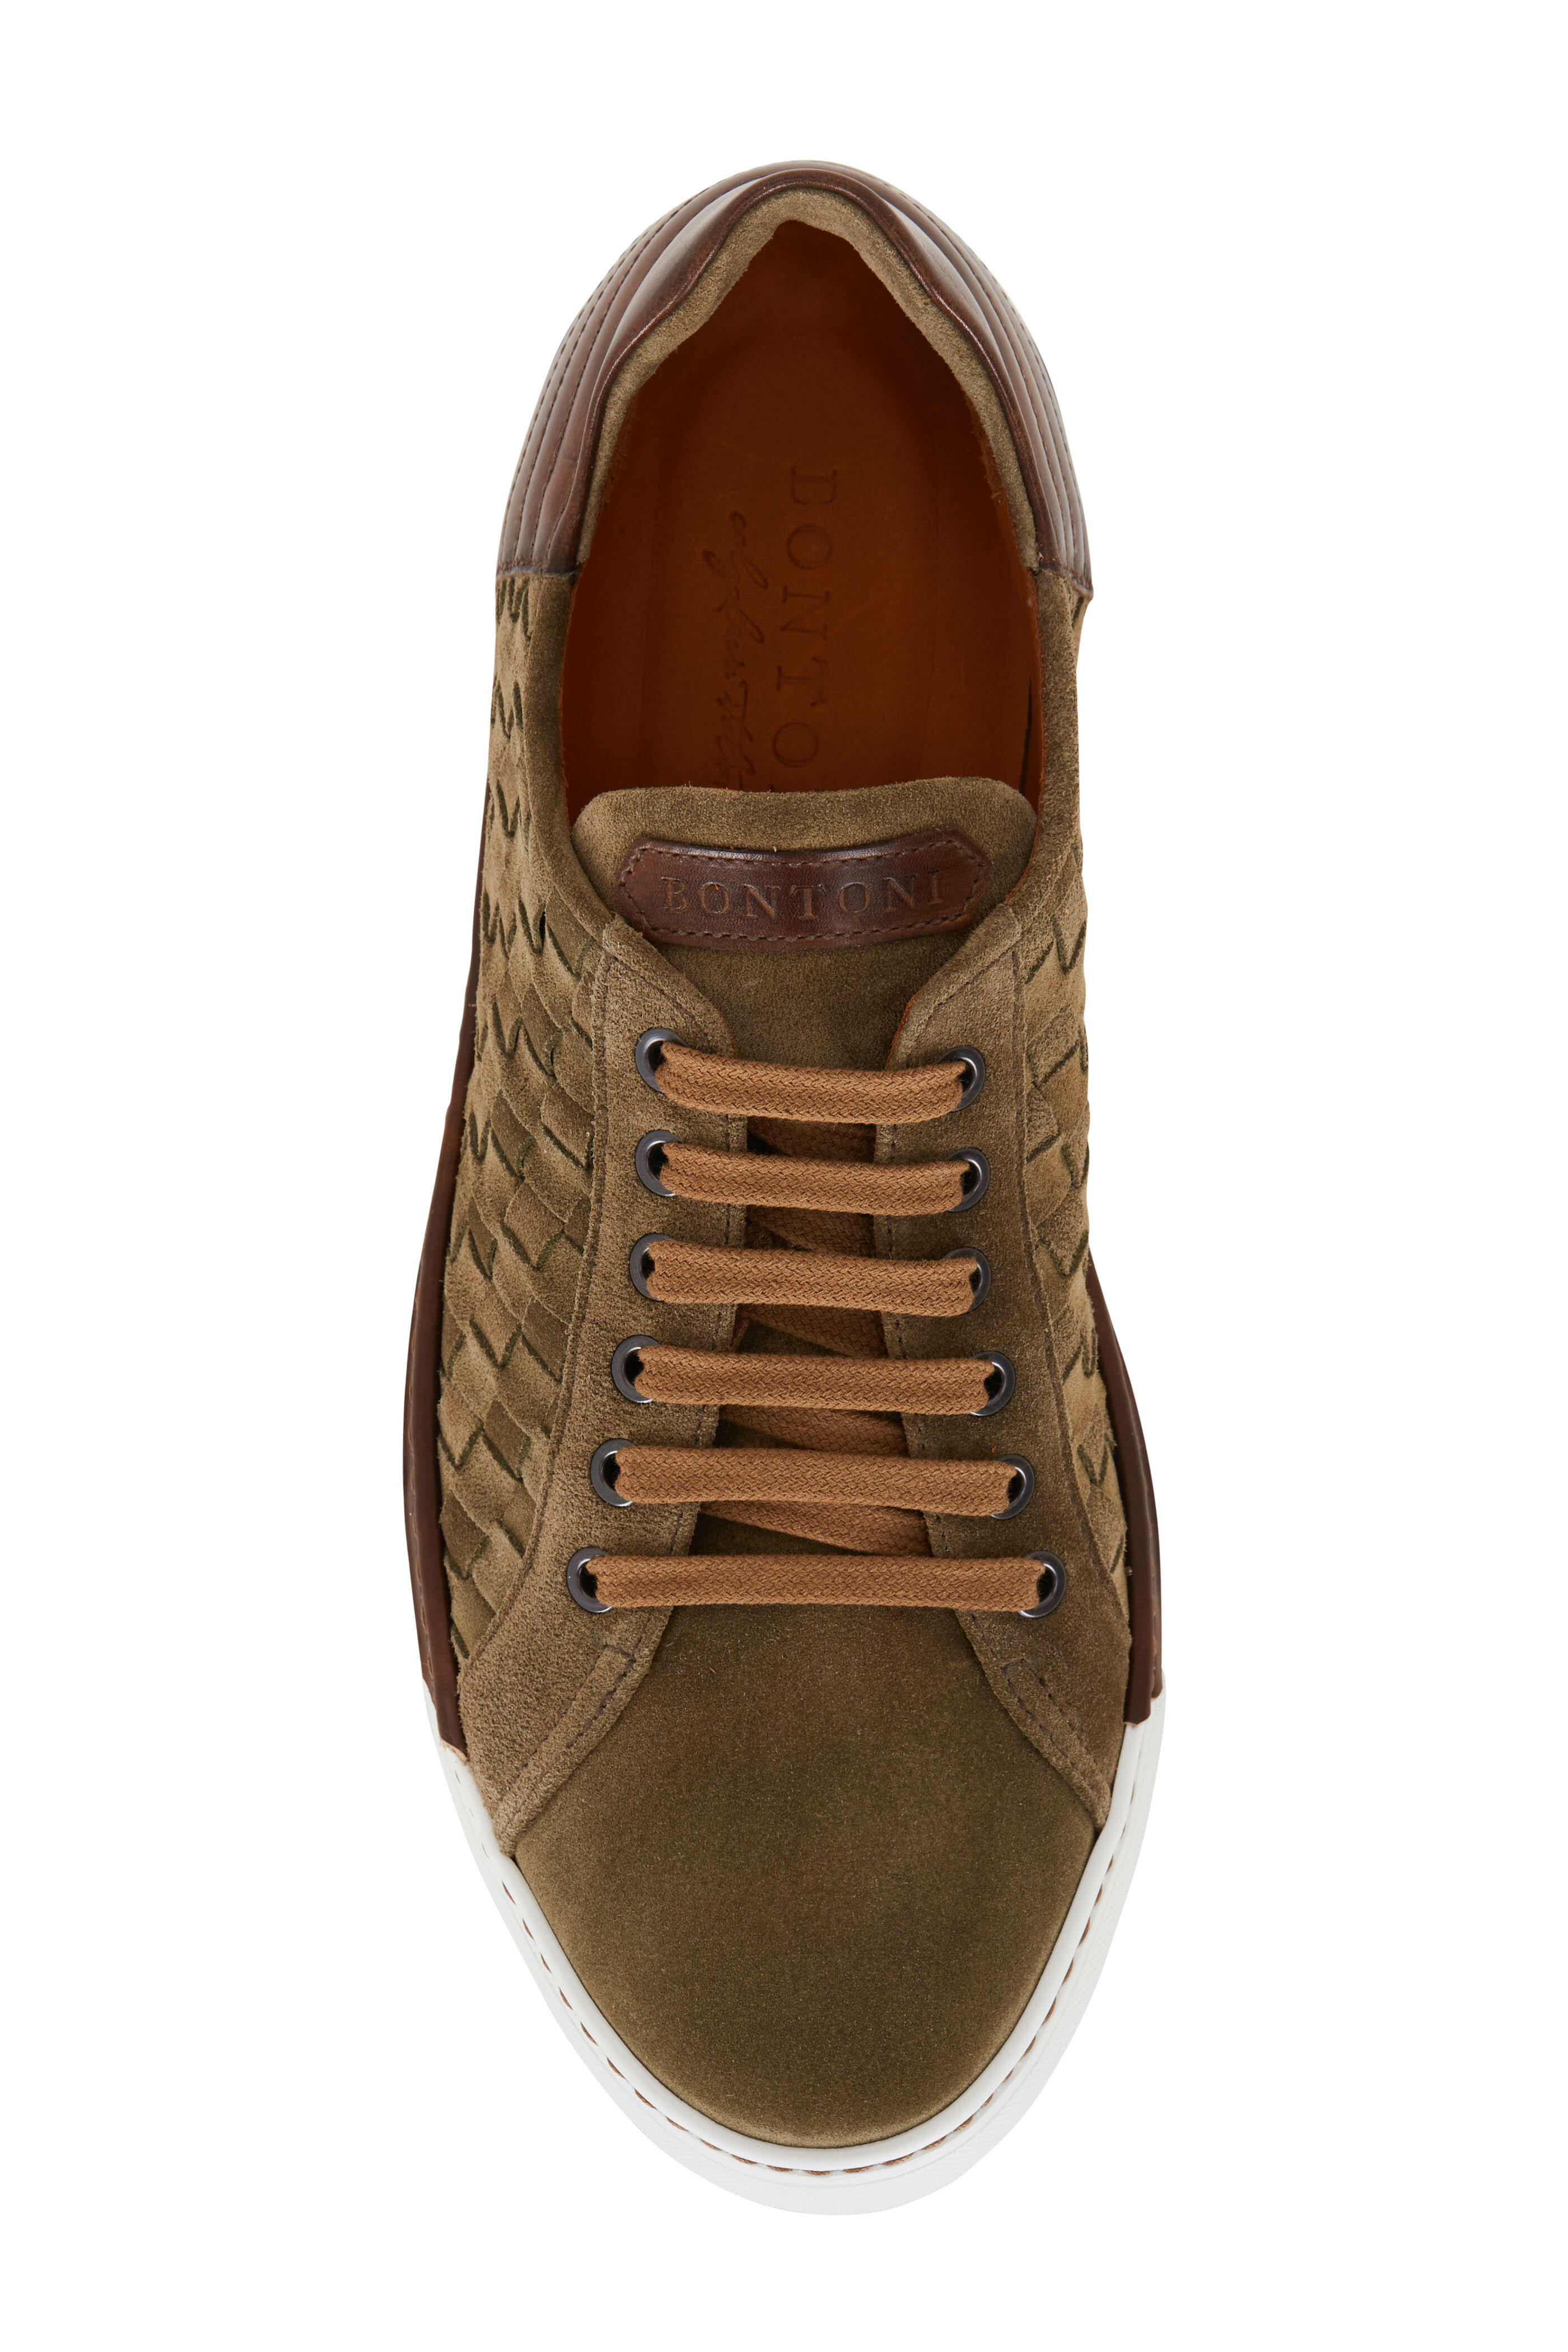 Brown Woven Leather Low Top Sneakers for Men by